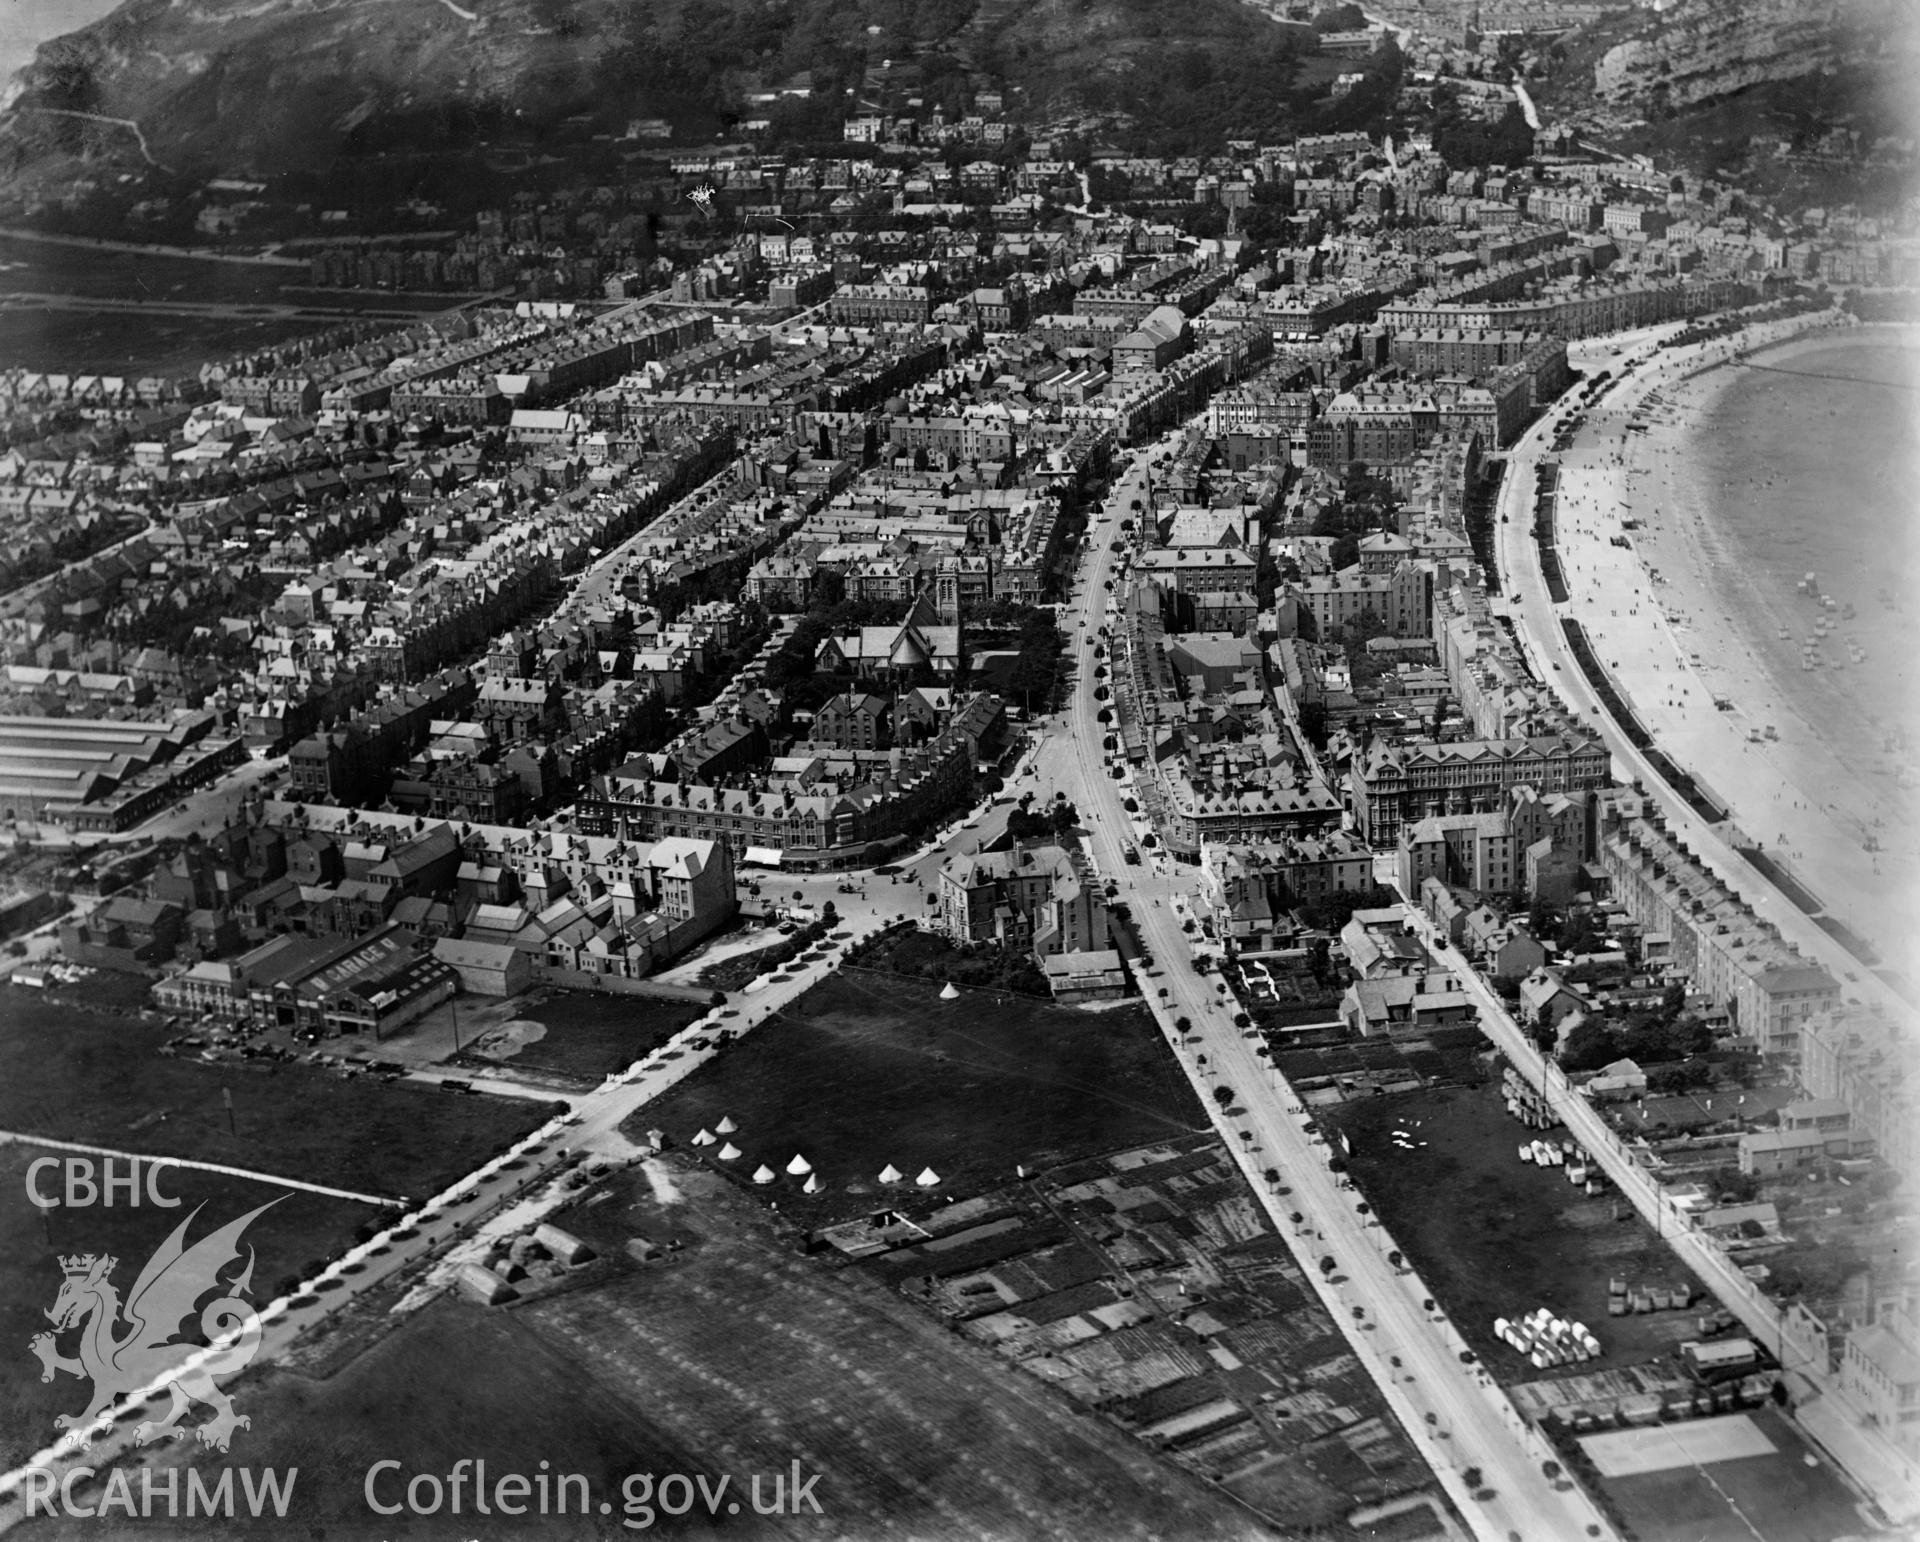 View of Llandudno showing St Tudnos Hotel and tents on playing fields, oblique aerial view. 5?x4? black and white glass plate negative.